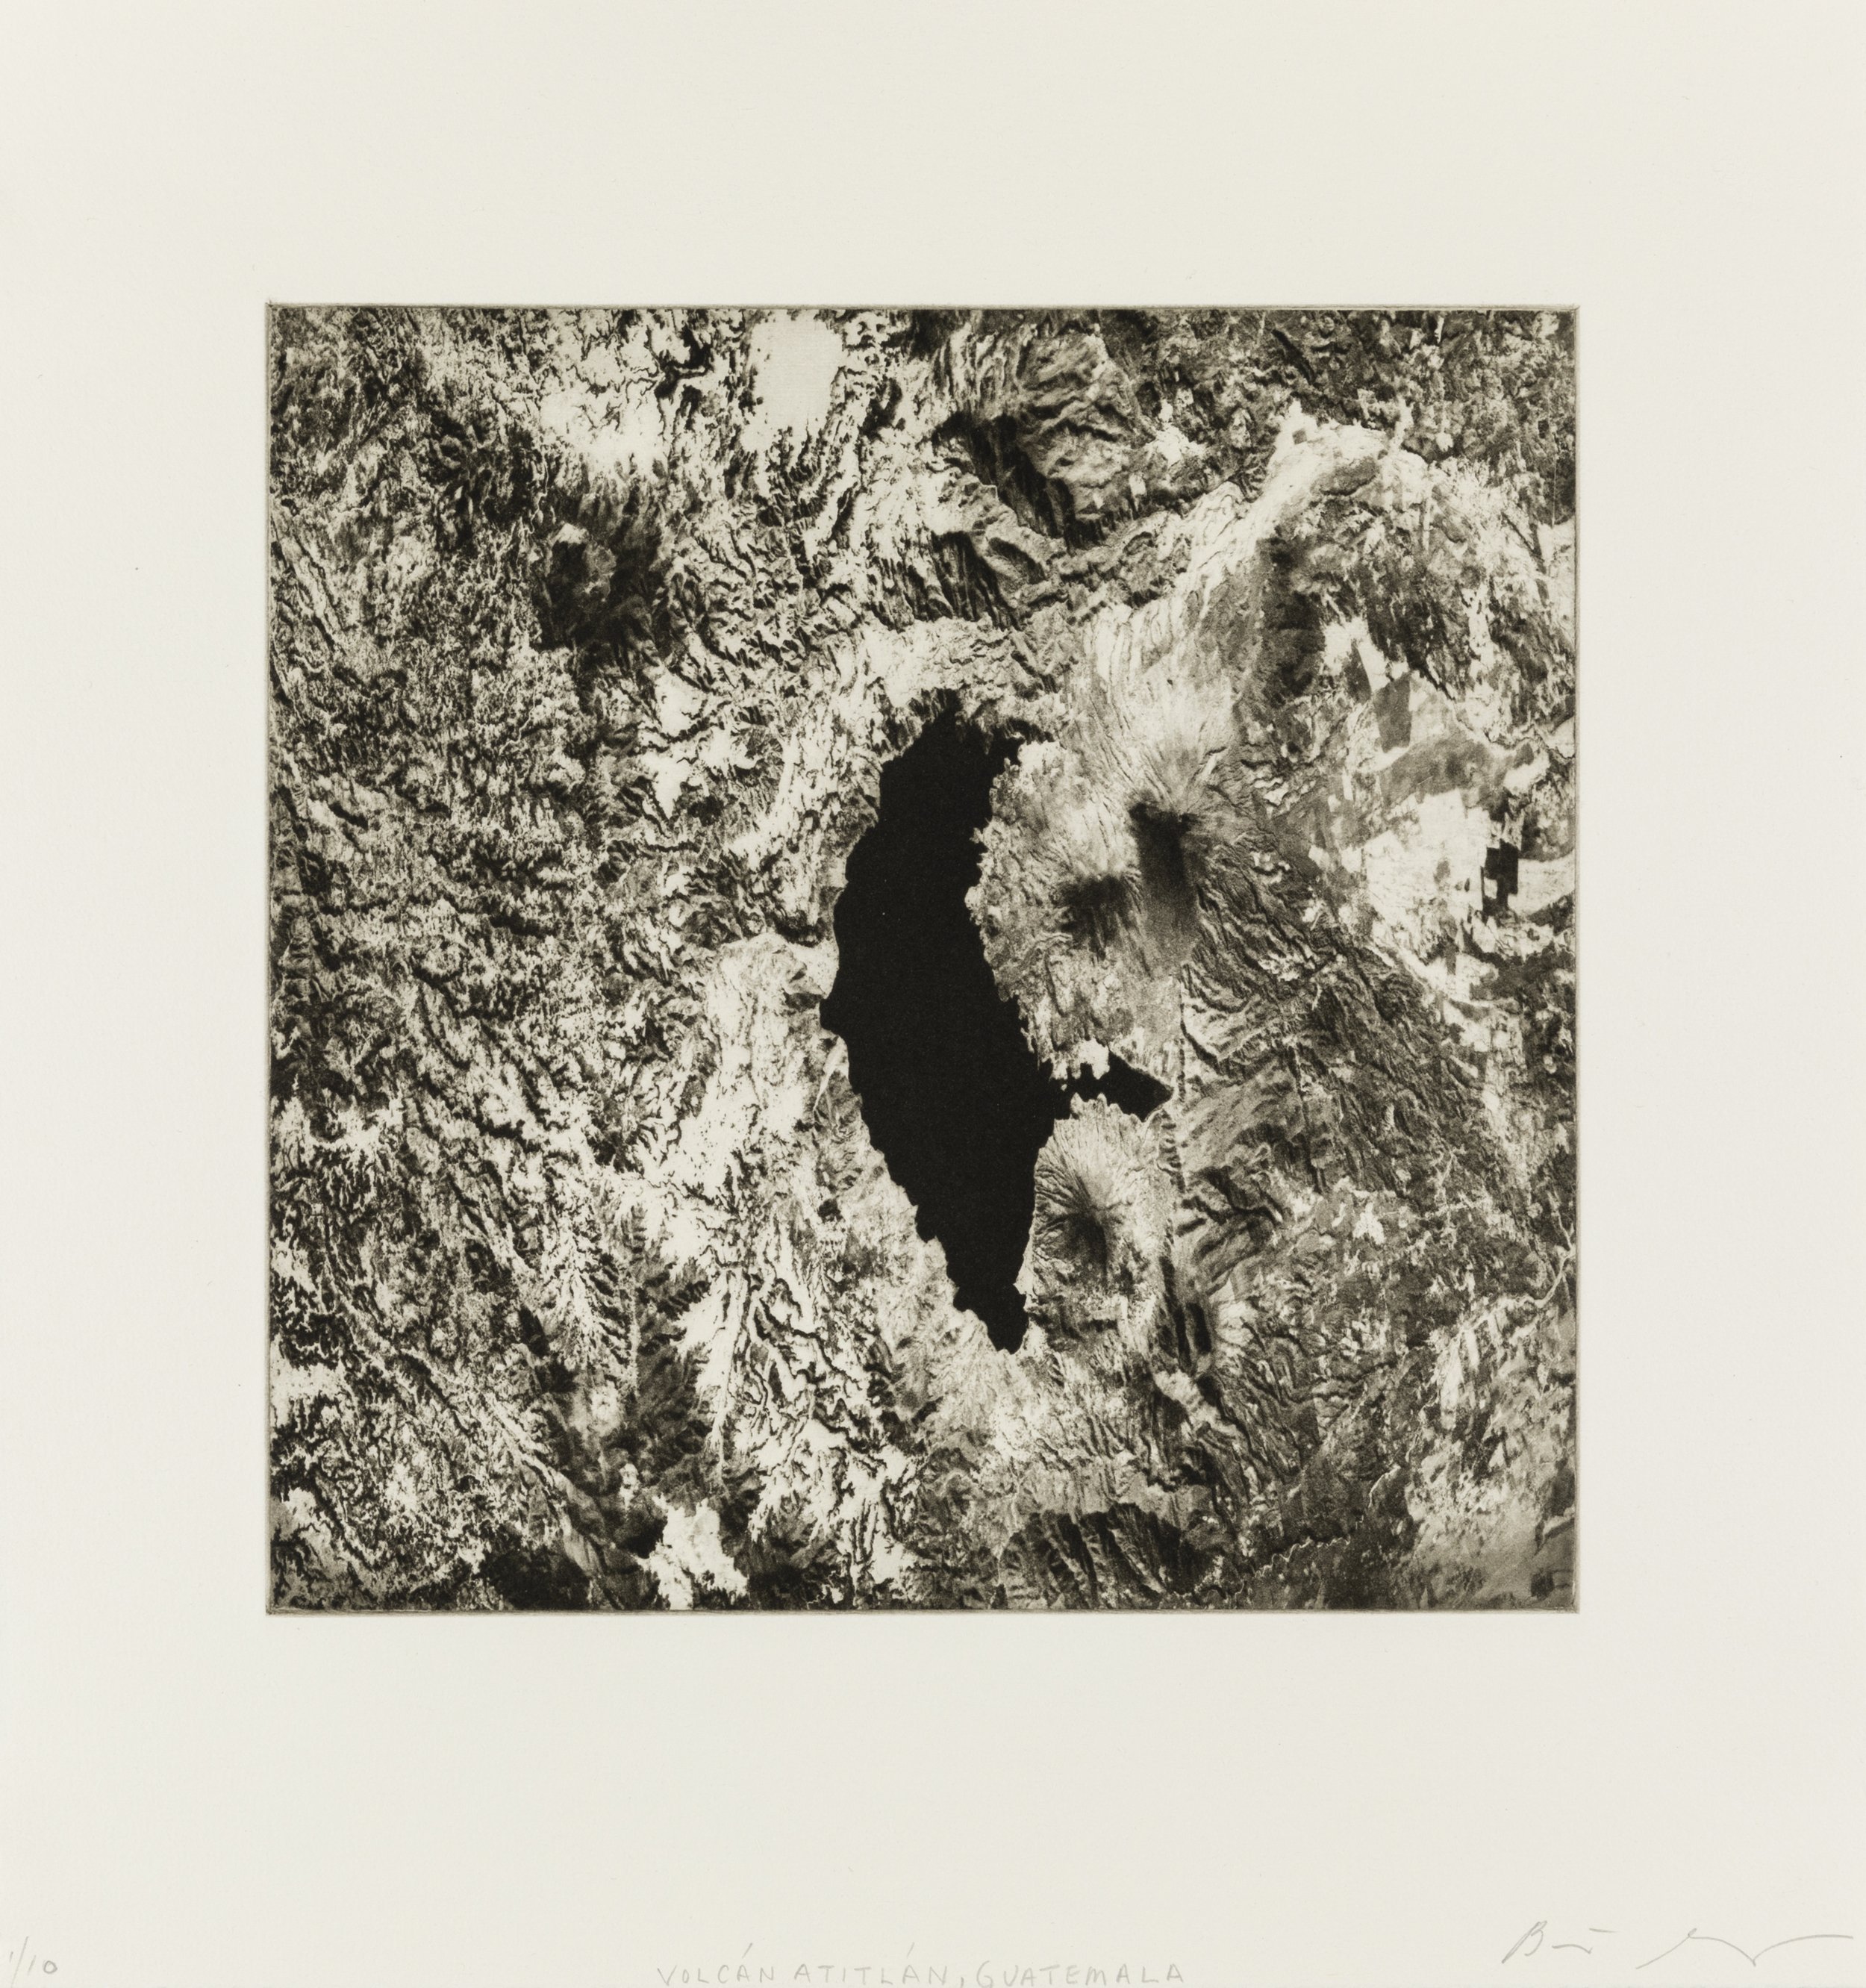    Volcan Atitlán, Guatemala, 2022   Copperplate photogravure etching on cotton rag paper, plate size; 10.6 x 10.6, paper size; 16 x 15.5, edition 10 